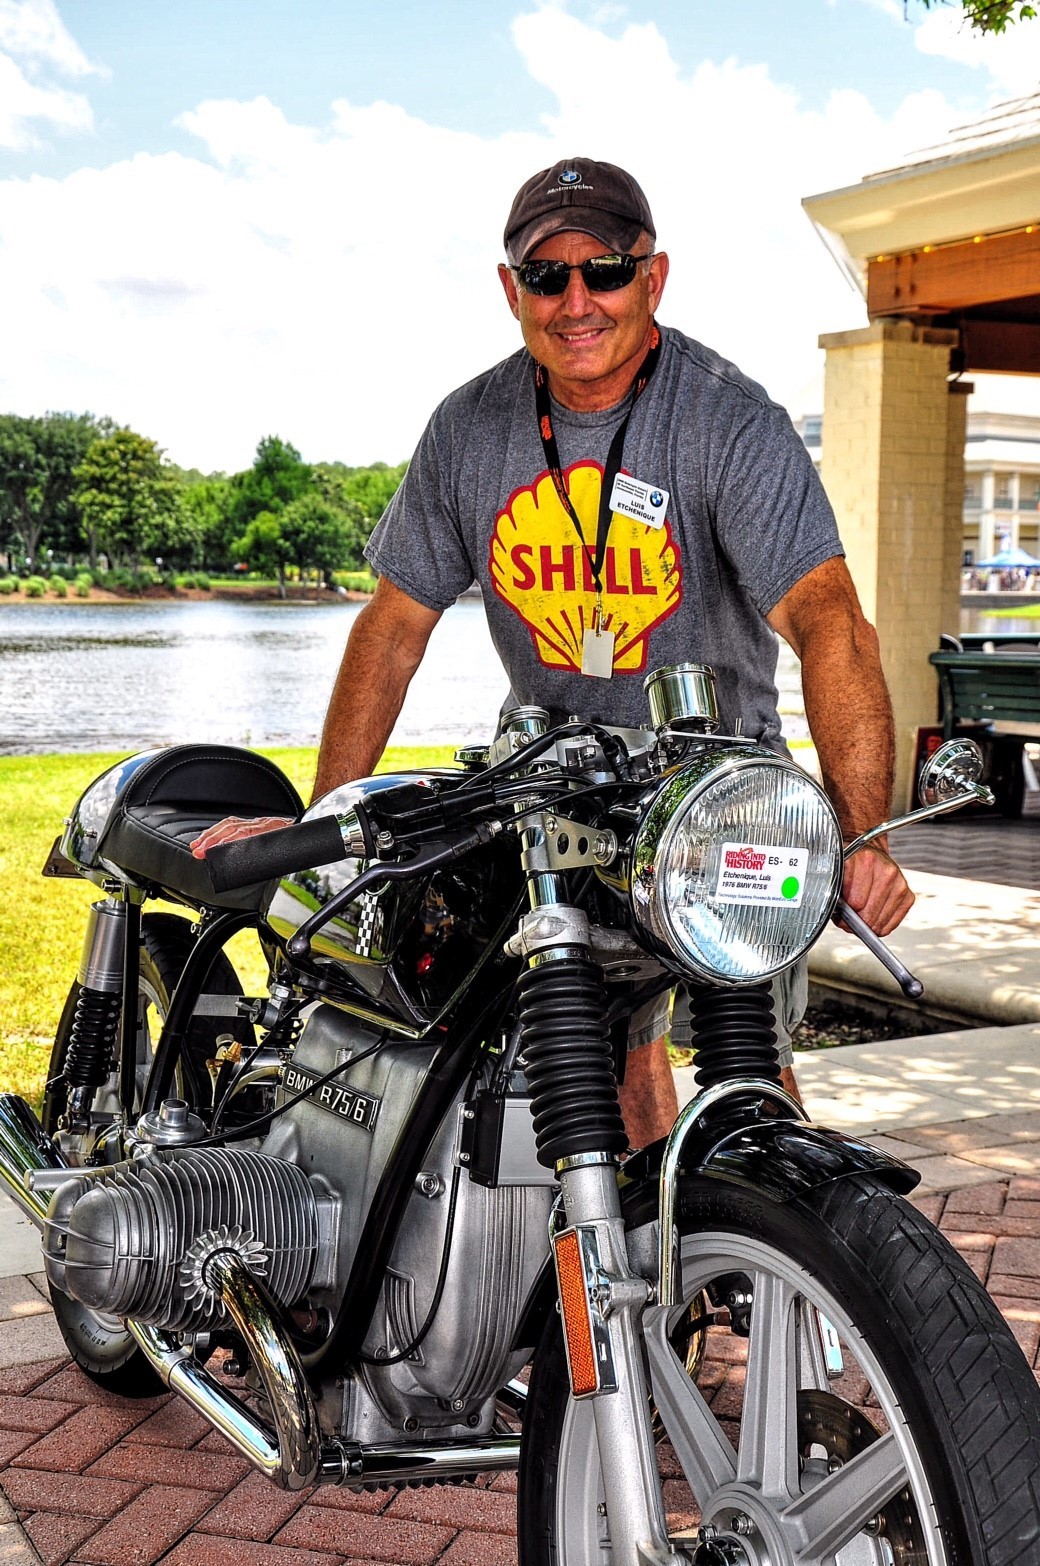 European Specials’ Best in Class was awarded to Luis Etchenique for his 1976 BMW R75/6, 900cc. Etchenique won the award for the second year in a row.